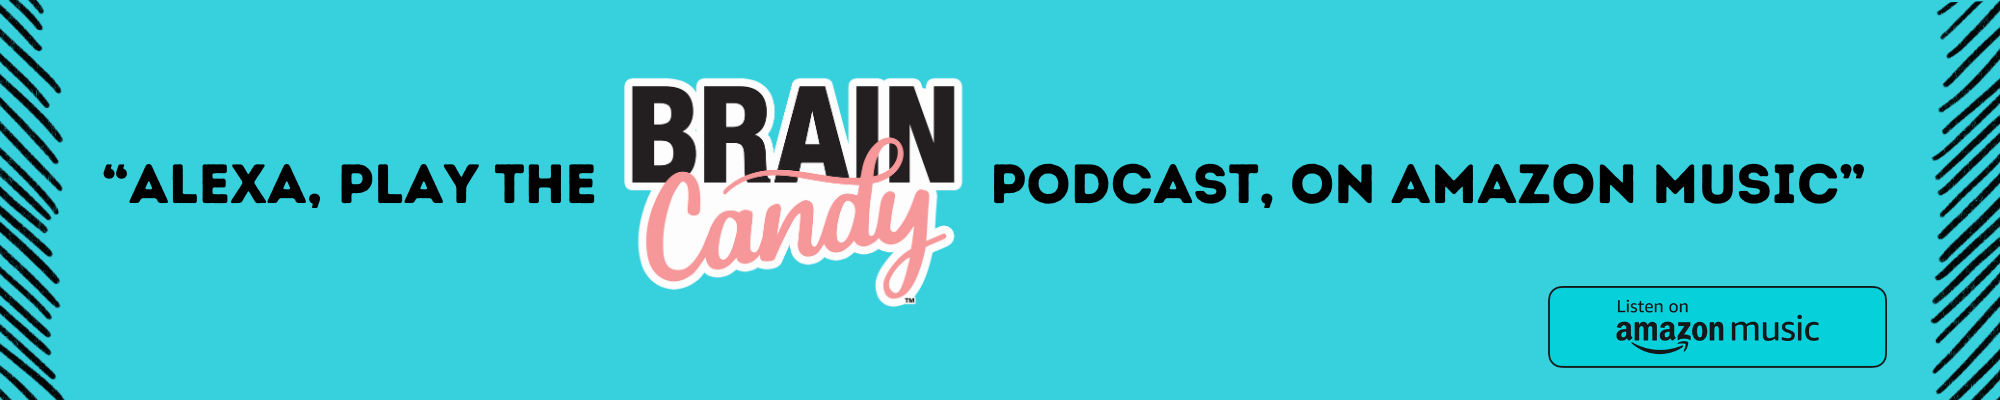 Play The Brain Candy Podcast on Amazon Music.